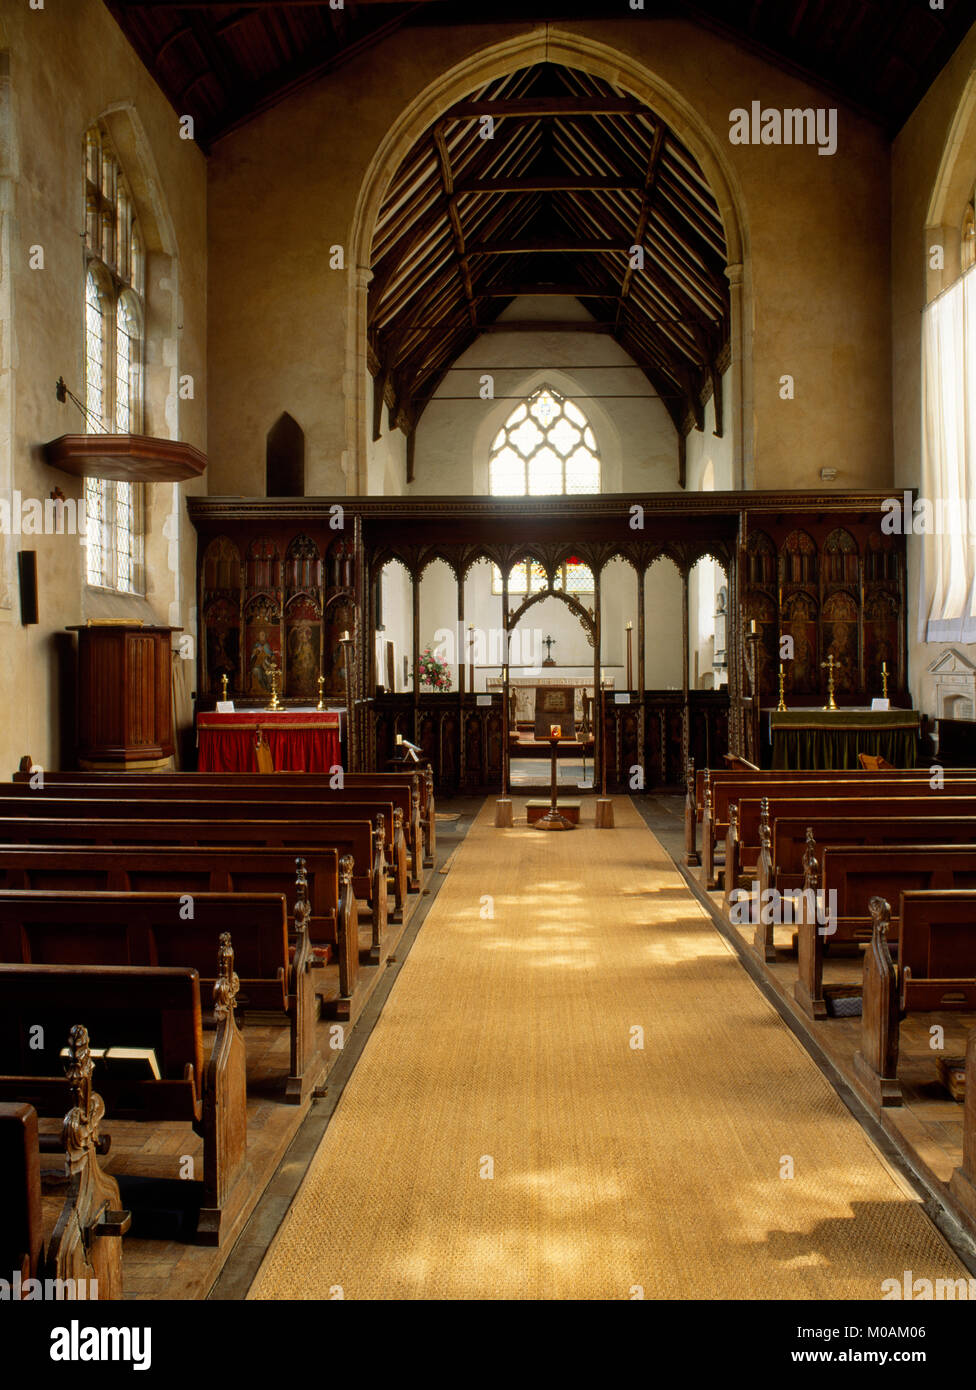 Nave of St Helen's Church, Ranworth, late C15th painted rood screen with north (L) & south (R) side altars, & high altar in chancel beyond the screen. Stock Photo